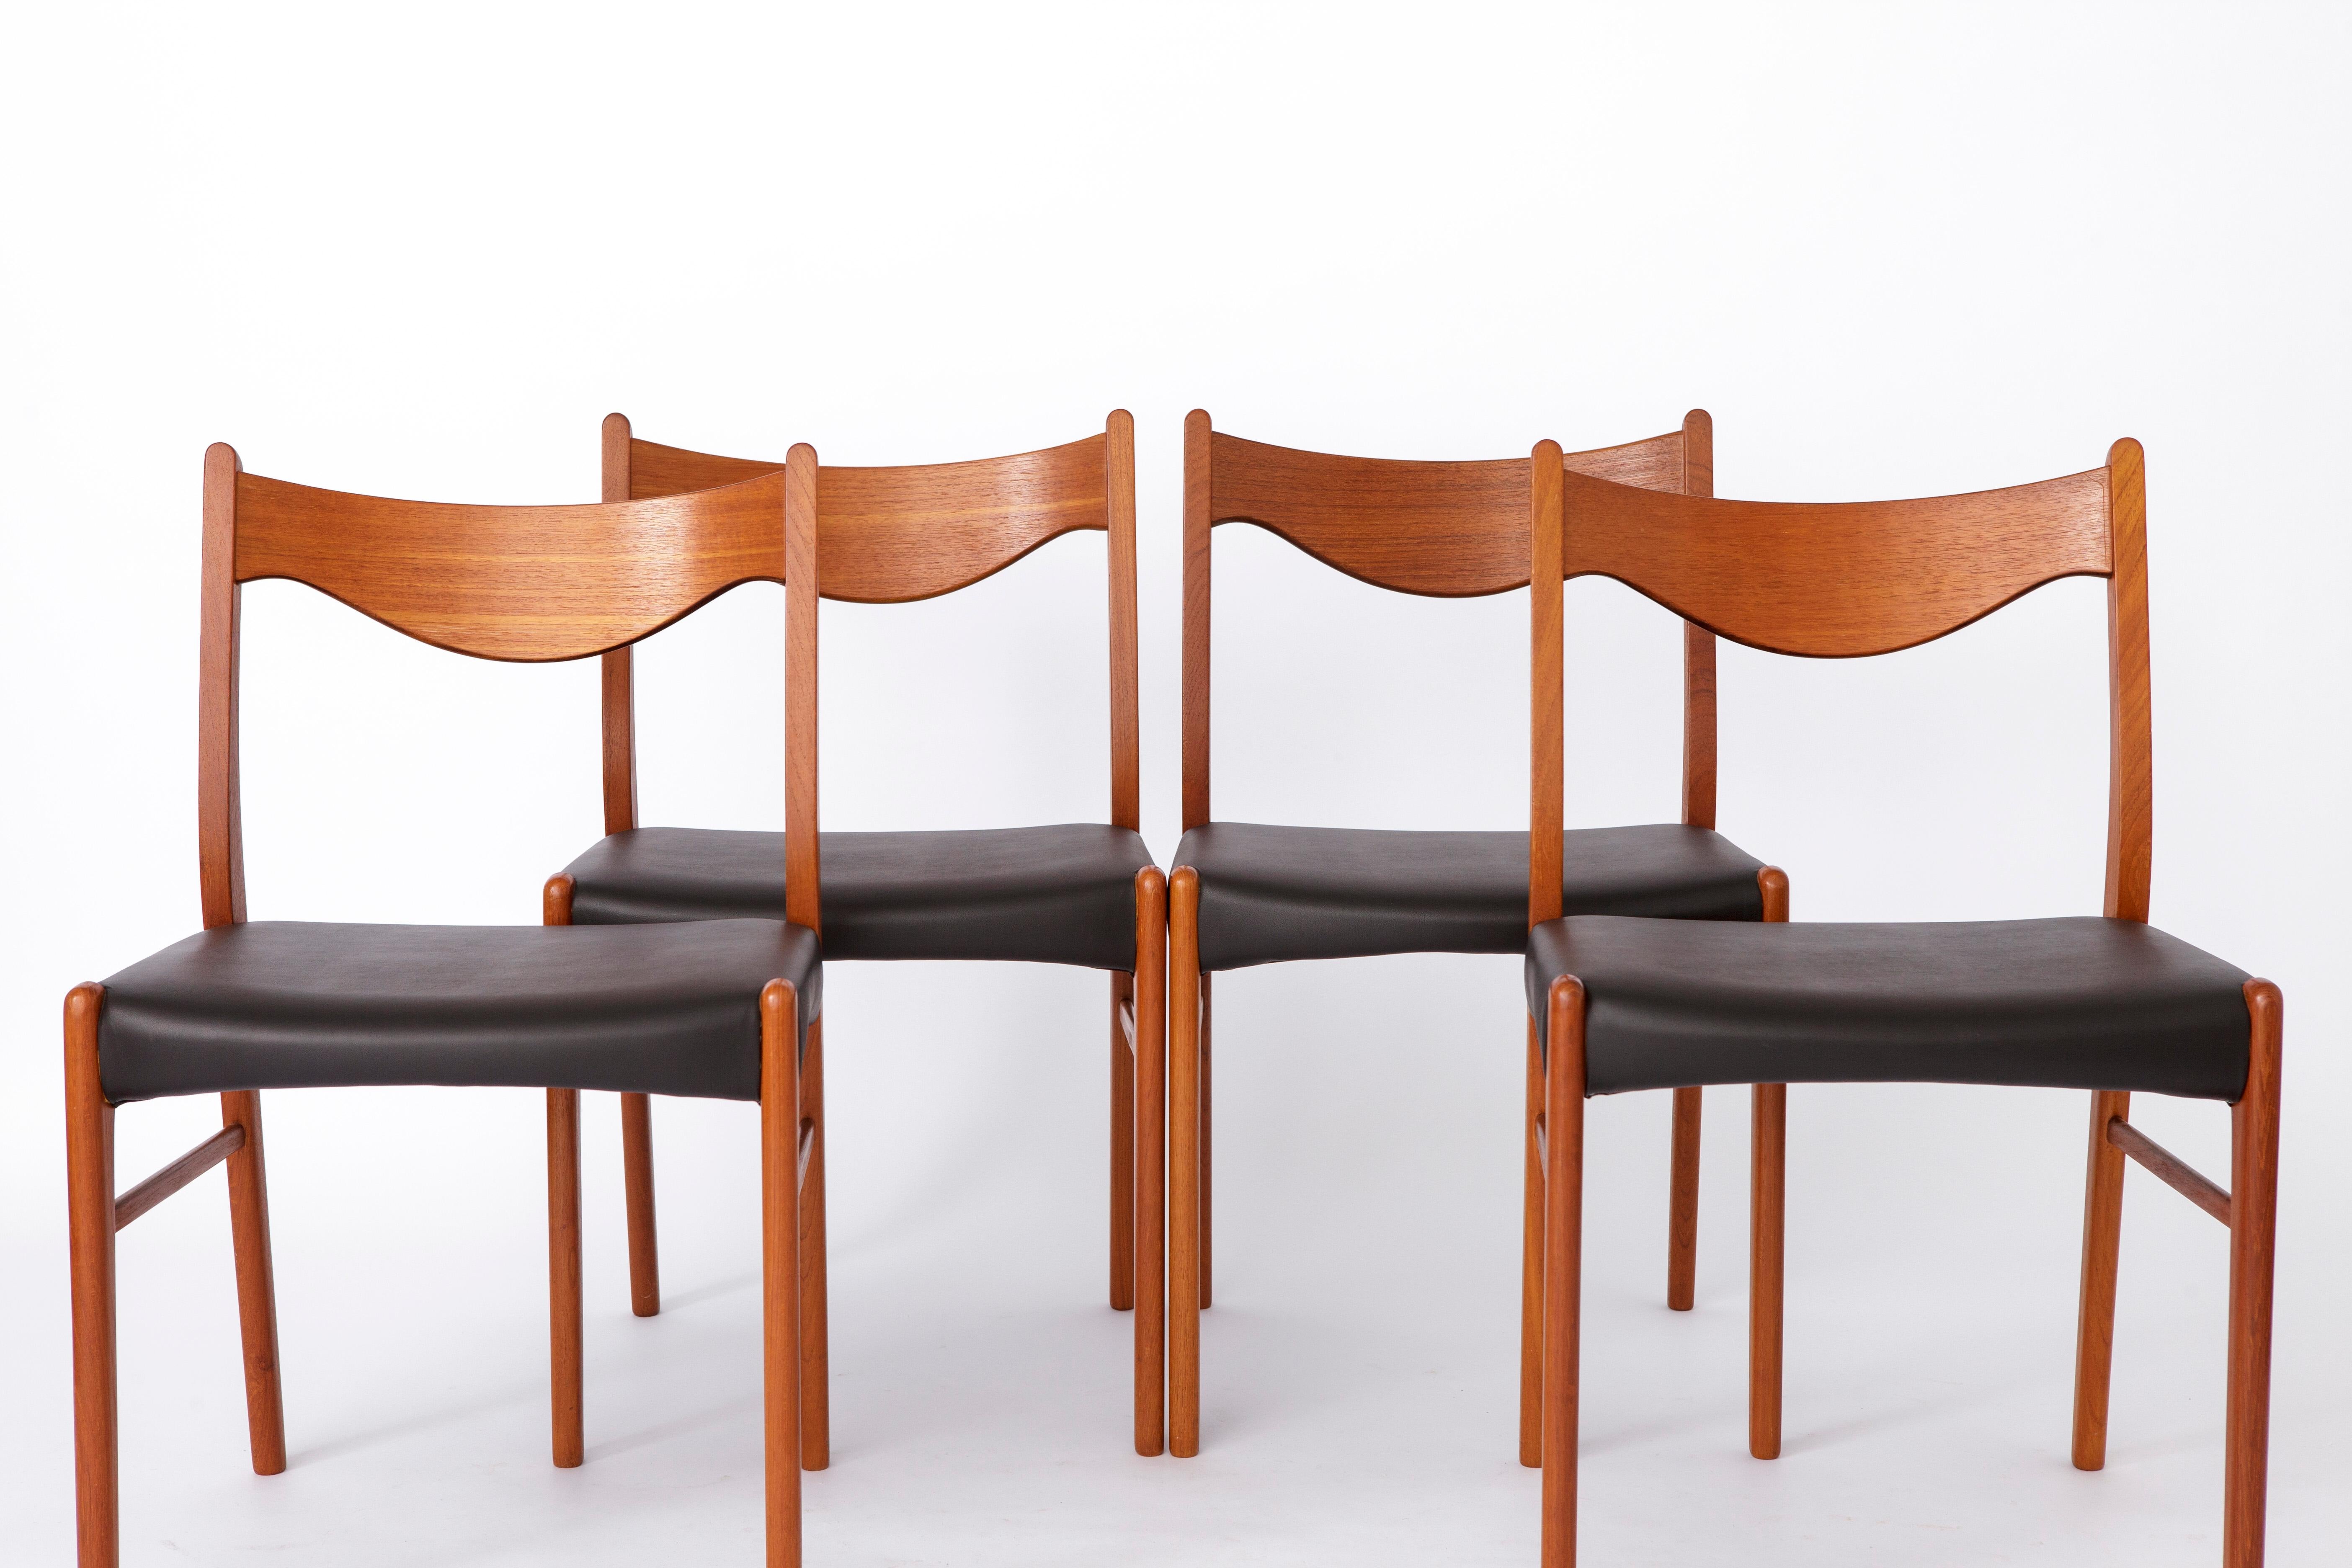 Set of 4 chairs designed by Arne Wahl Iversen for the manufacturer Glyngøre stolefabrik in the 1960s. 
Model: GS61 from the 1960s. 
Displayed price is for a set of 4 chairs. 

All chairs are in very good condition after restoration. 
Teak wood frame